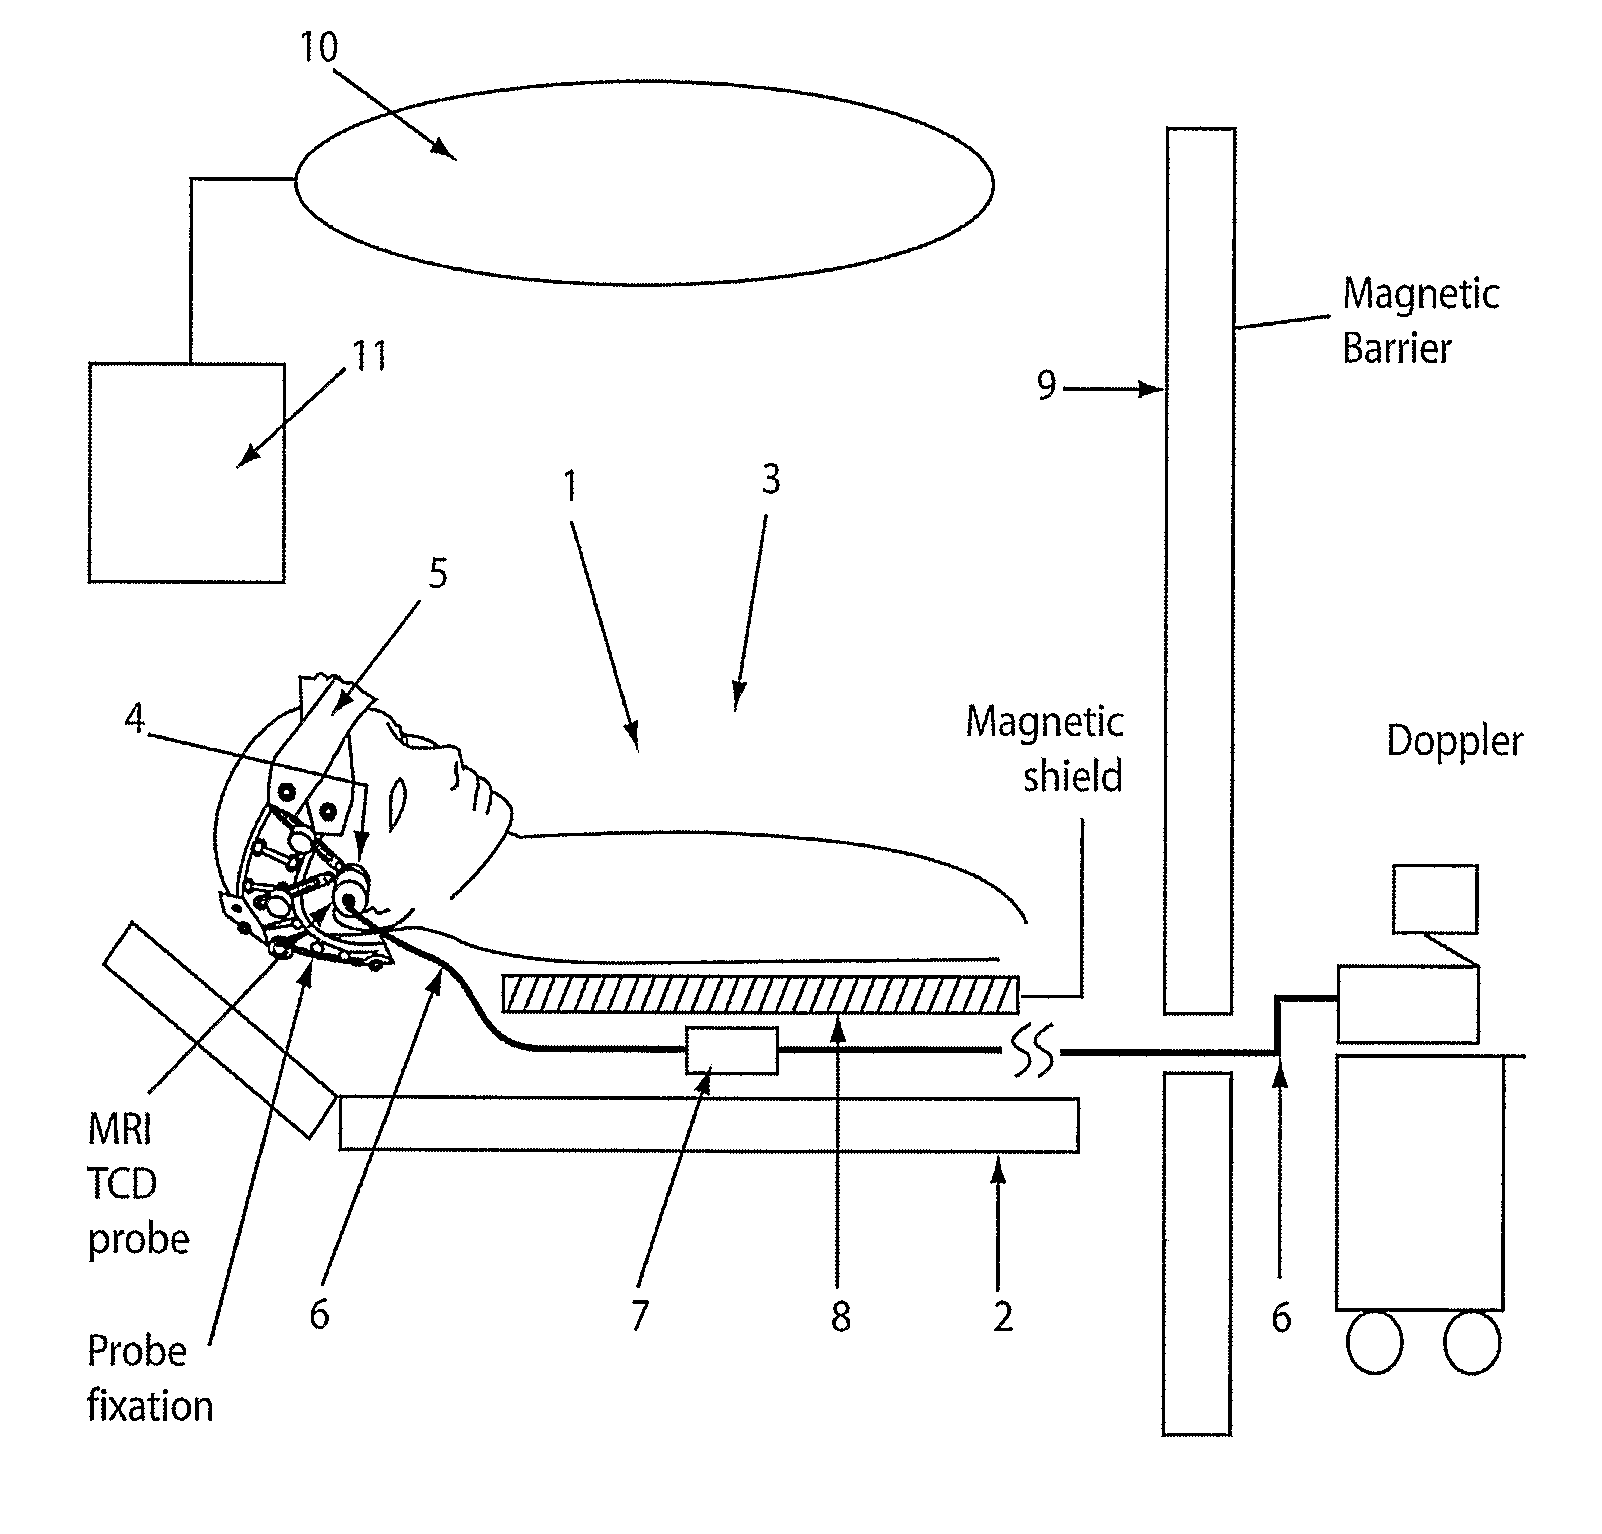 Ultrasound in magnetic spatial imaging apparatus